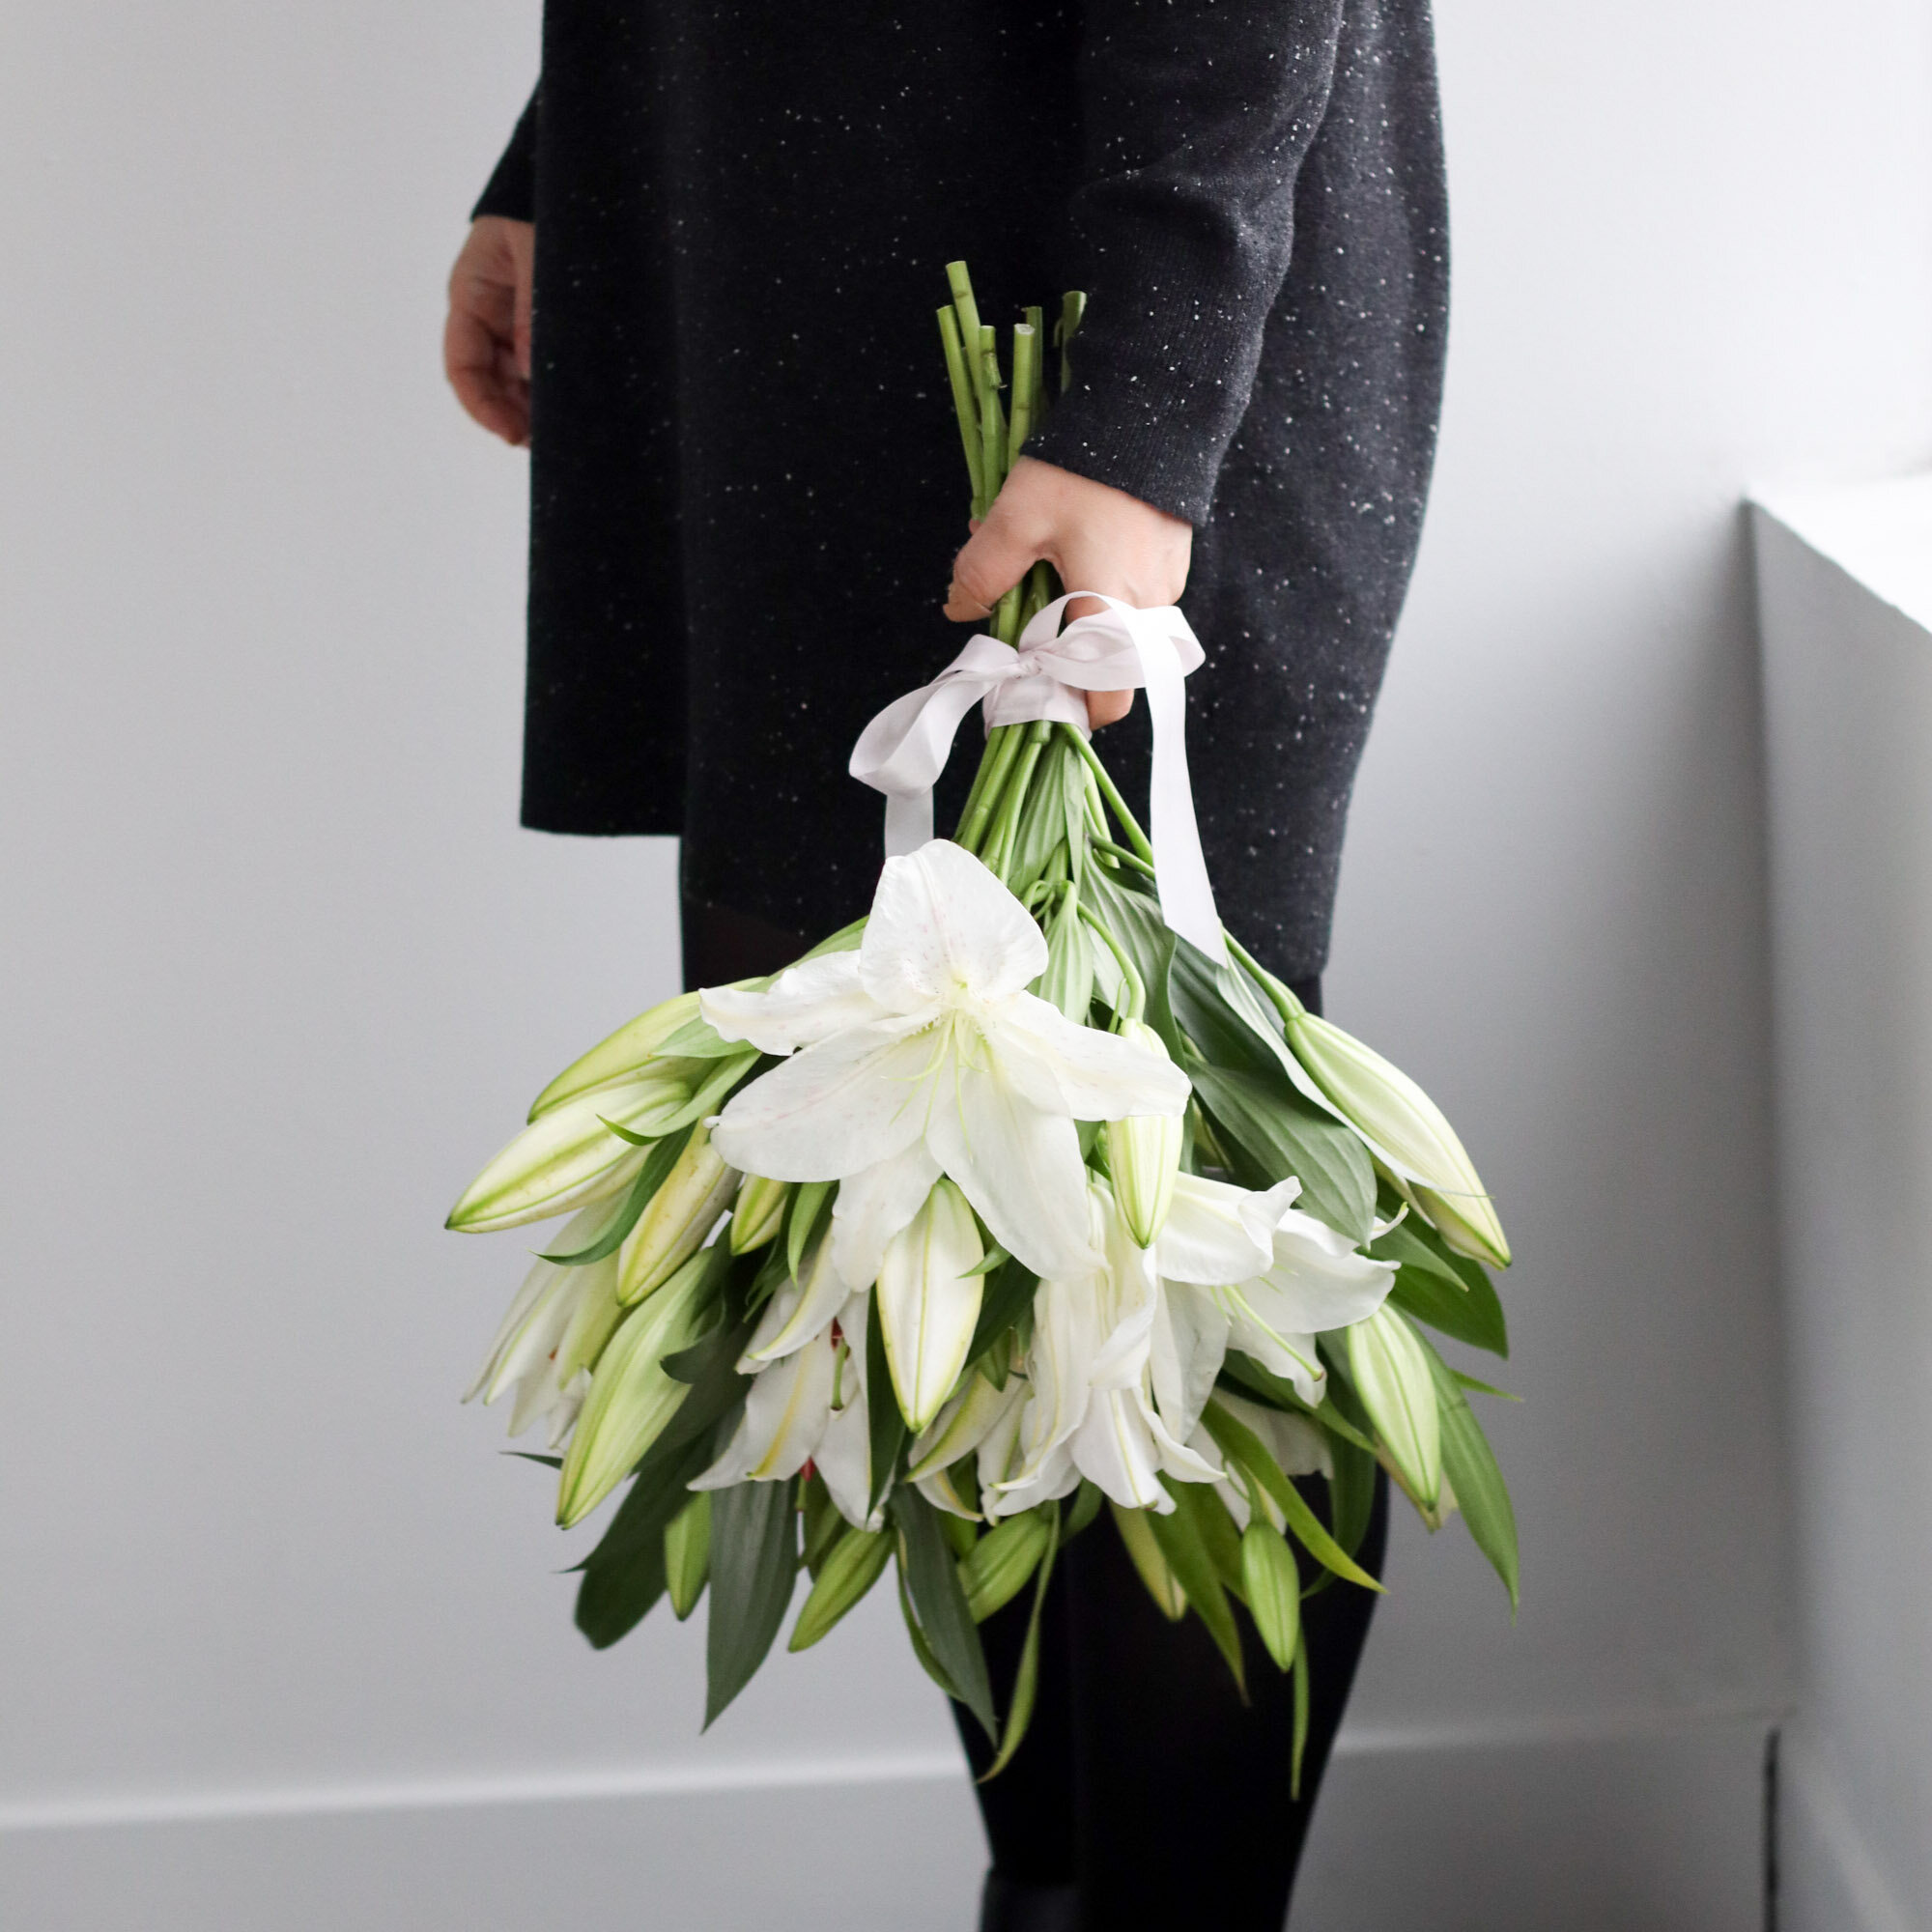 A bouquet of white lilies and greenery tied with a white bow, held upside down beside a person